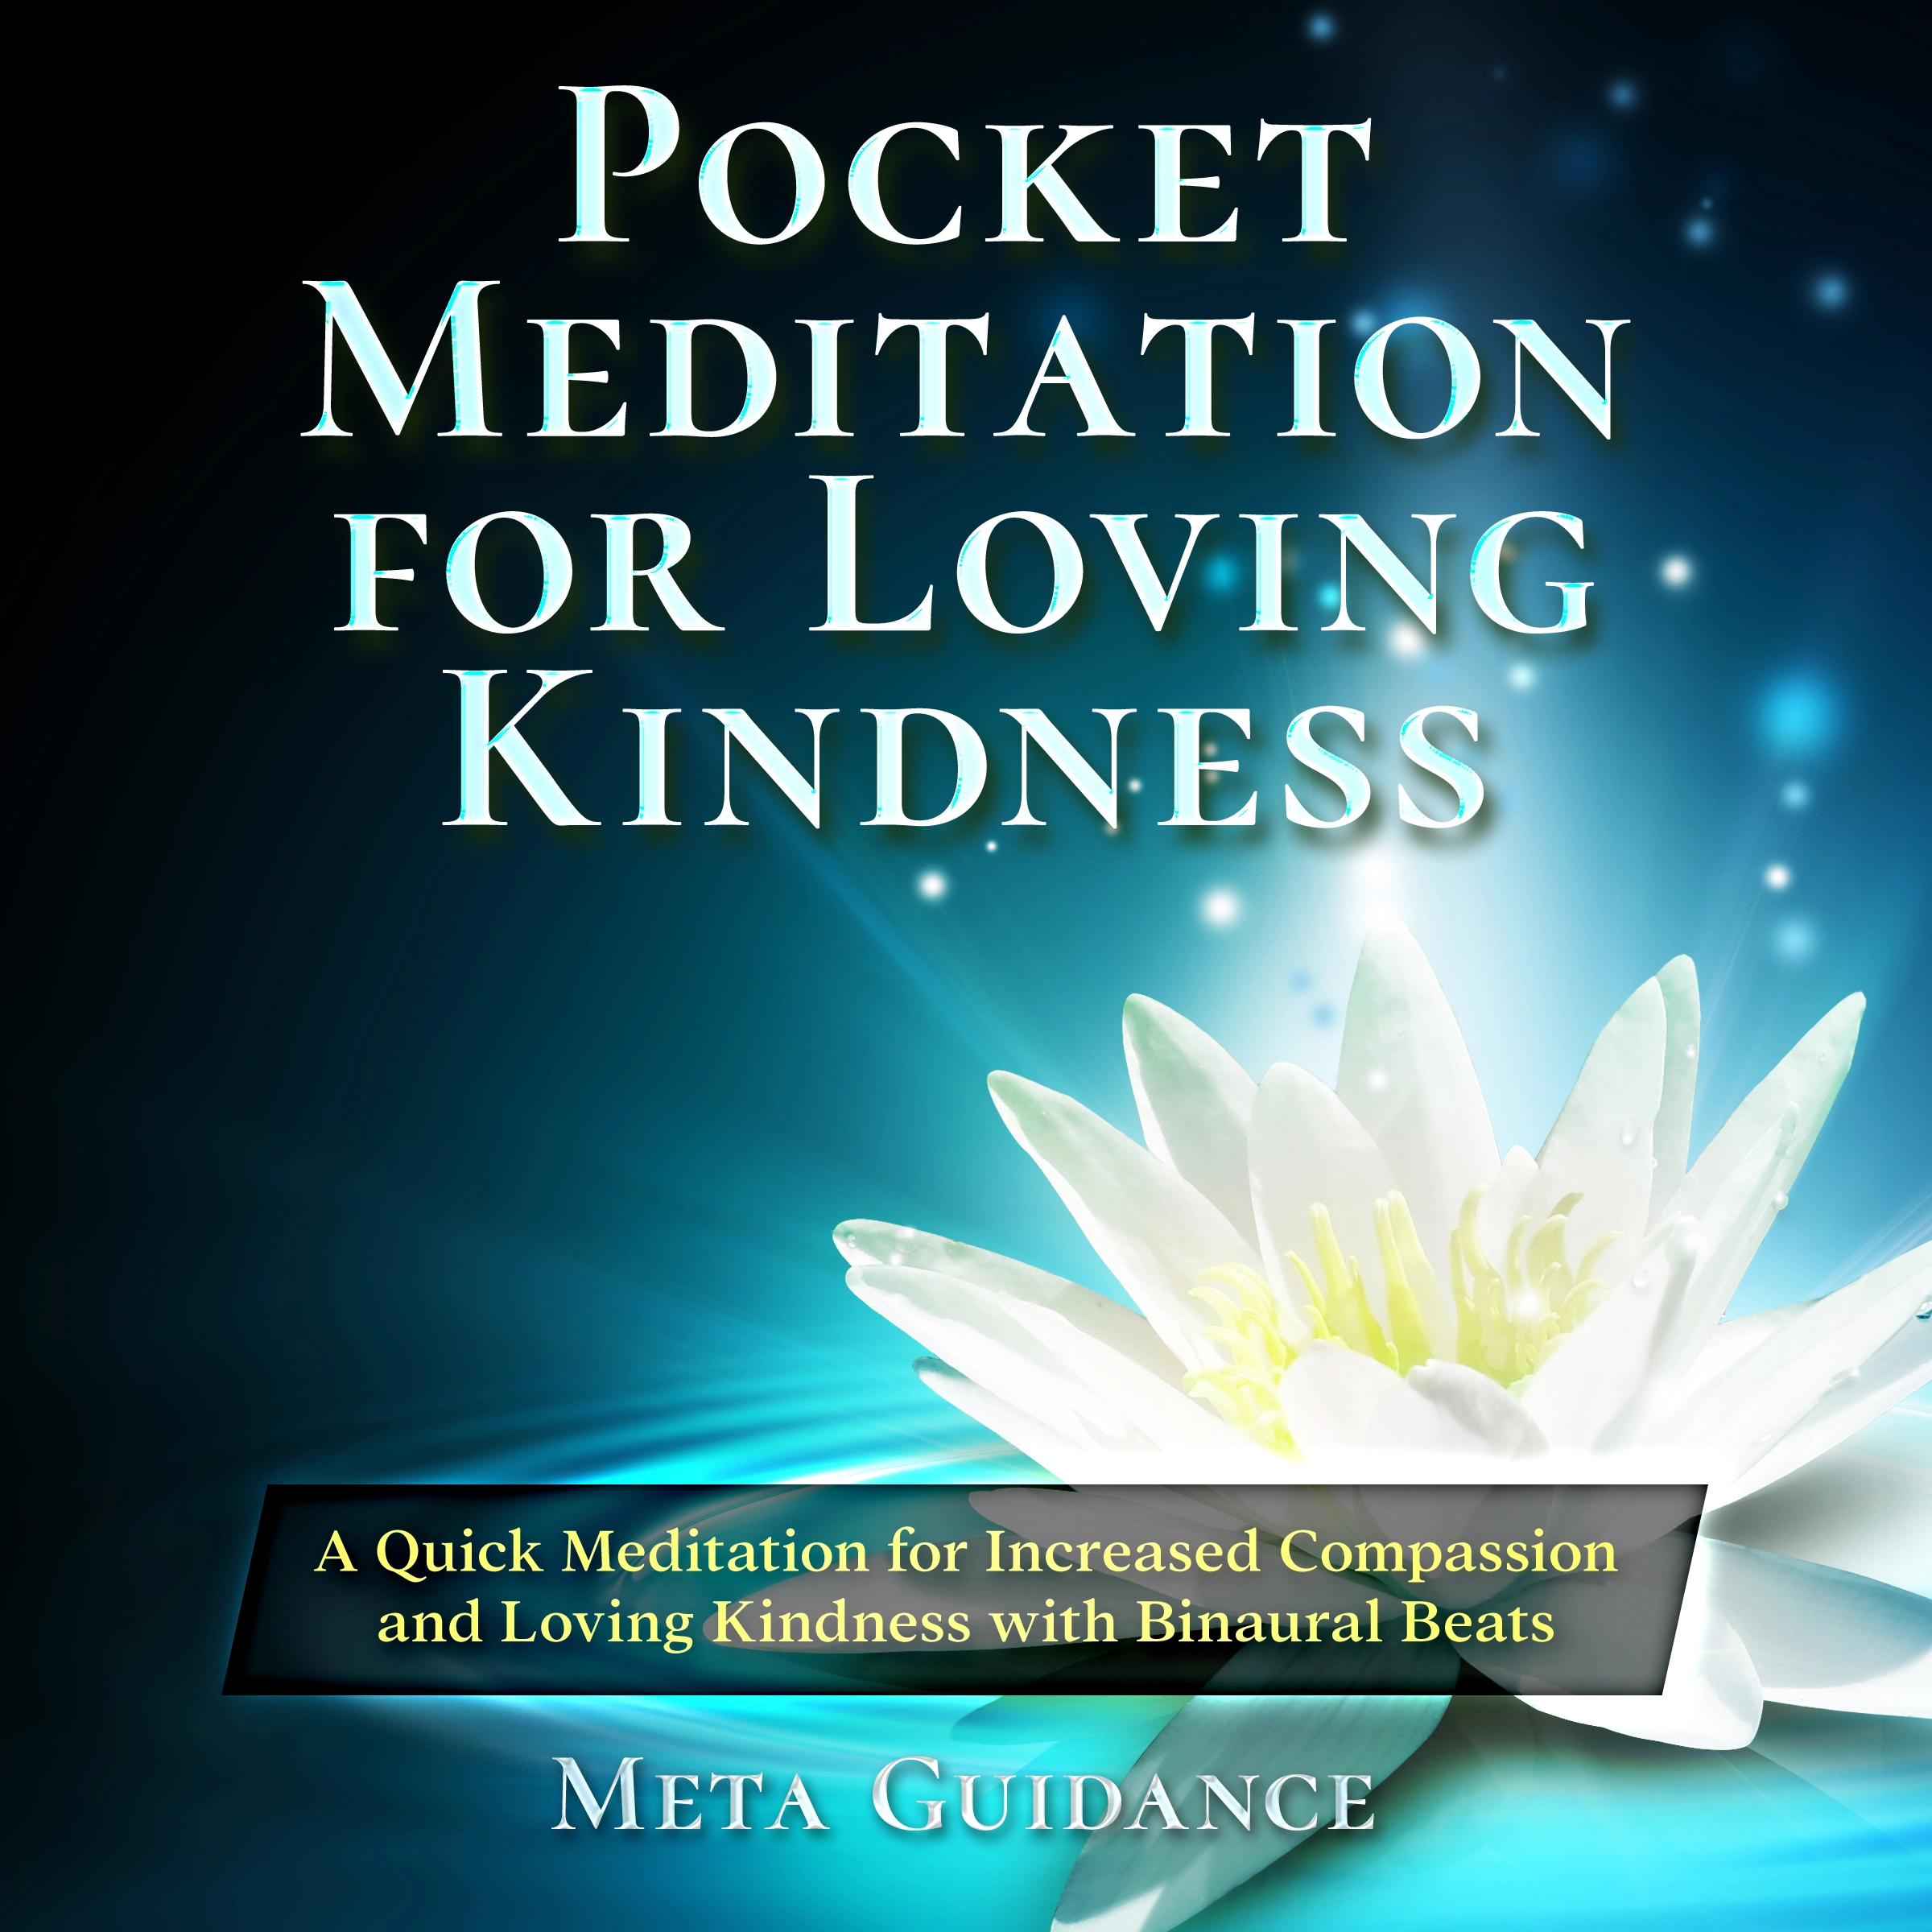 Pocket Meditation for Loving Kindness: A Quick Meditation for Increased Compassion and Loving Kindness with Binaural Beats Audiobook by Meta Guidance